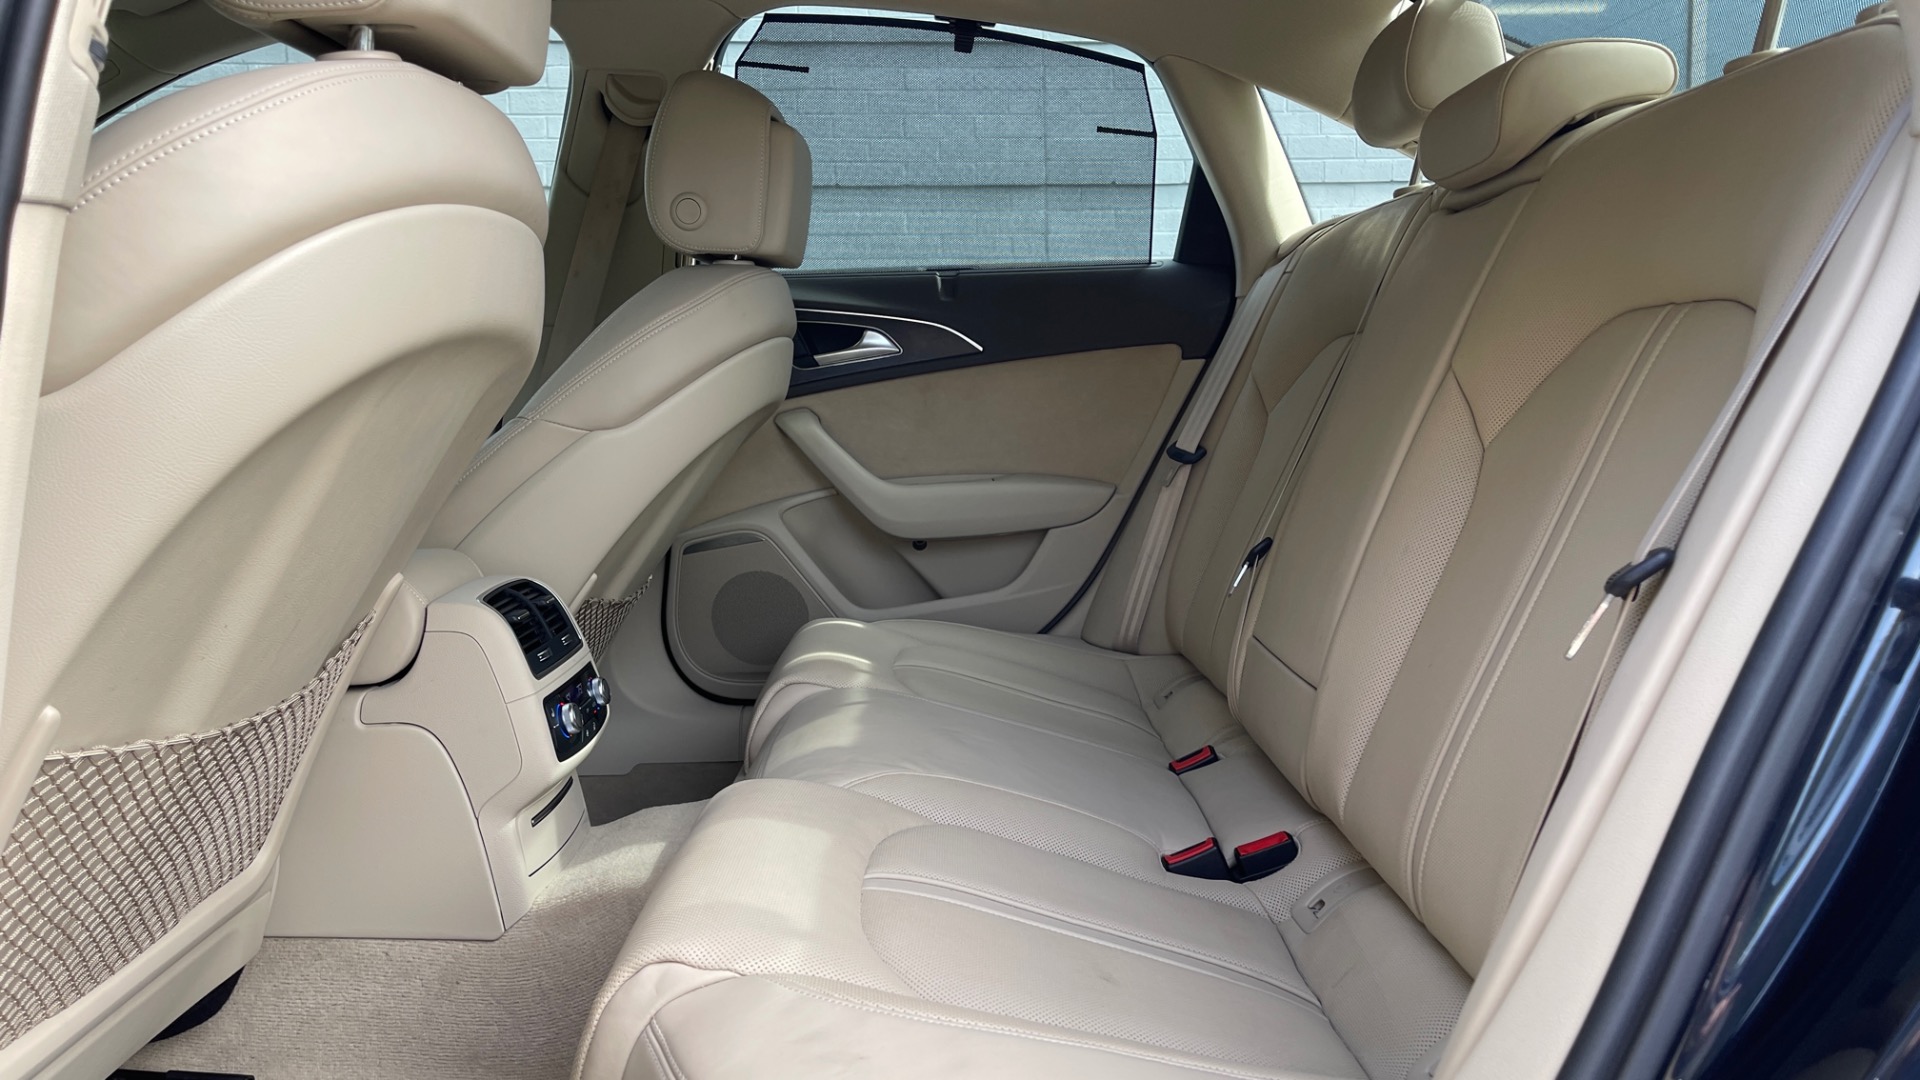 Used 2018 Audi A6 PRESTIGE / CONTOUR FRONT SEATS / MASSAGE / SUNROOF / LEATHER / AWD for sale $38,395 at Formula Imports in Charlotte NC 28227 16